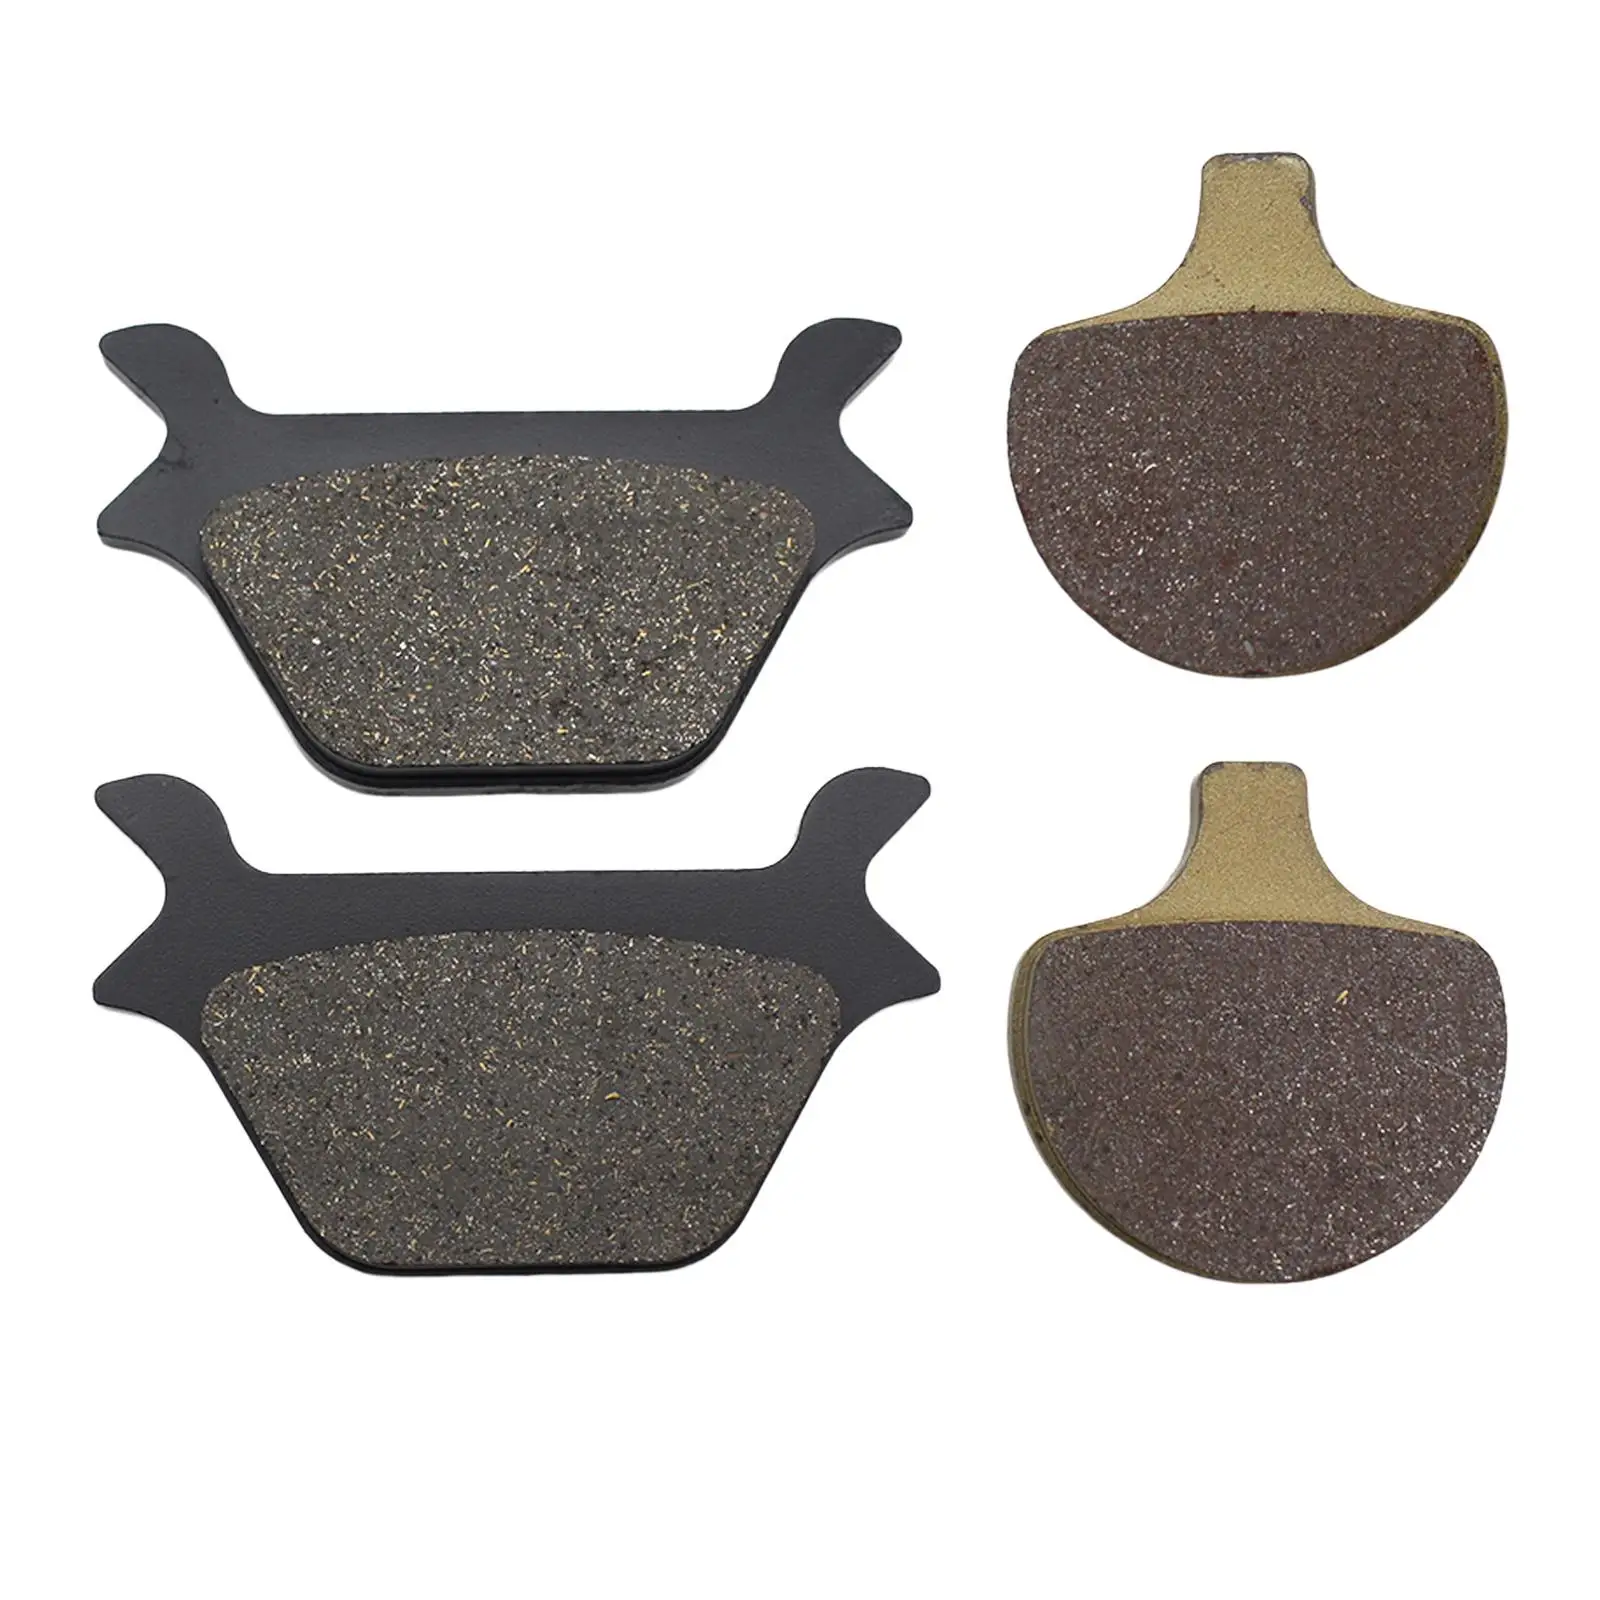 4 Pieces Motorcycle Front Rear Brake Pads for Fatboy Direct Replaces